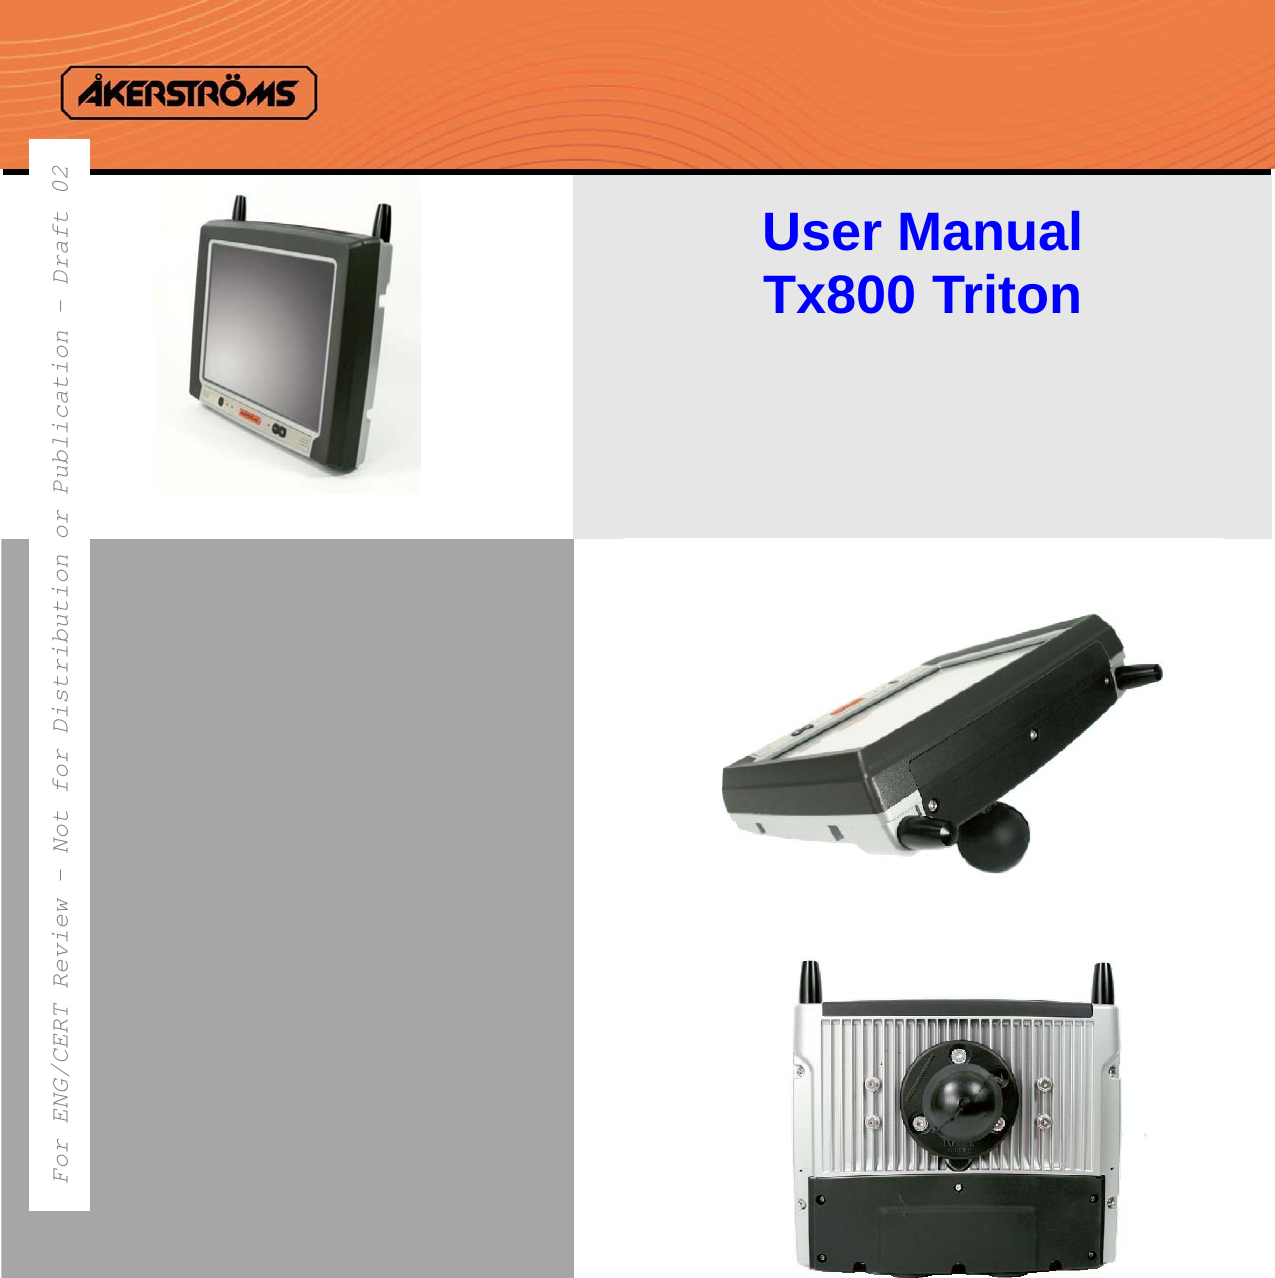    User Manual Tx800 Triton   For ENG/CERT Review - Not for Distribution or Publication - Draft 02